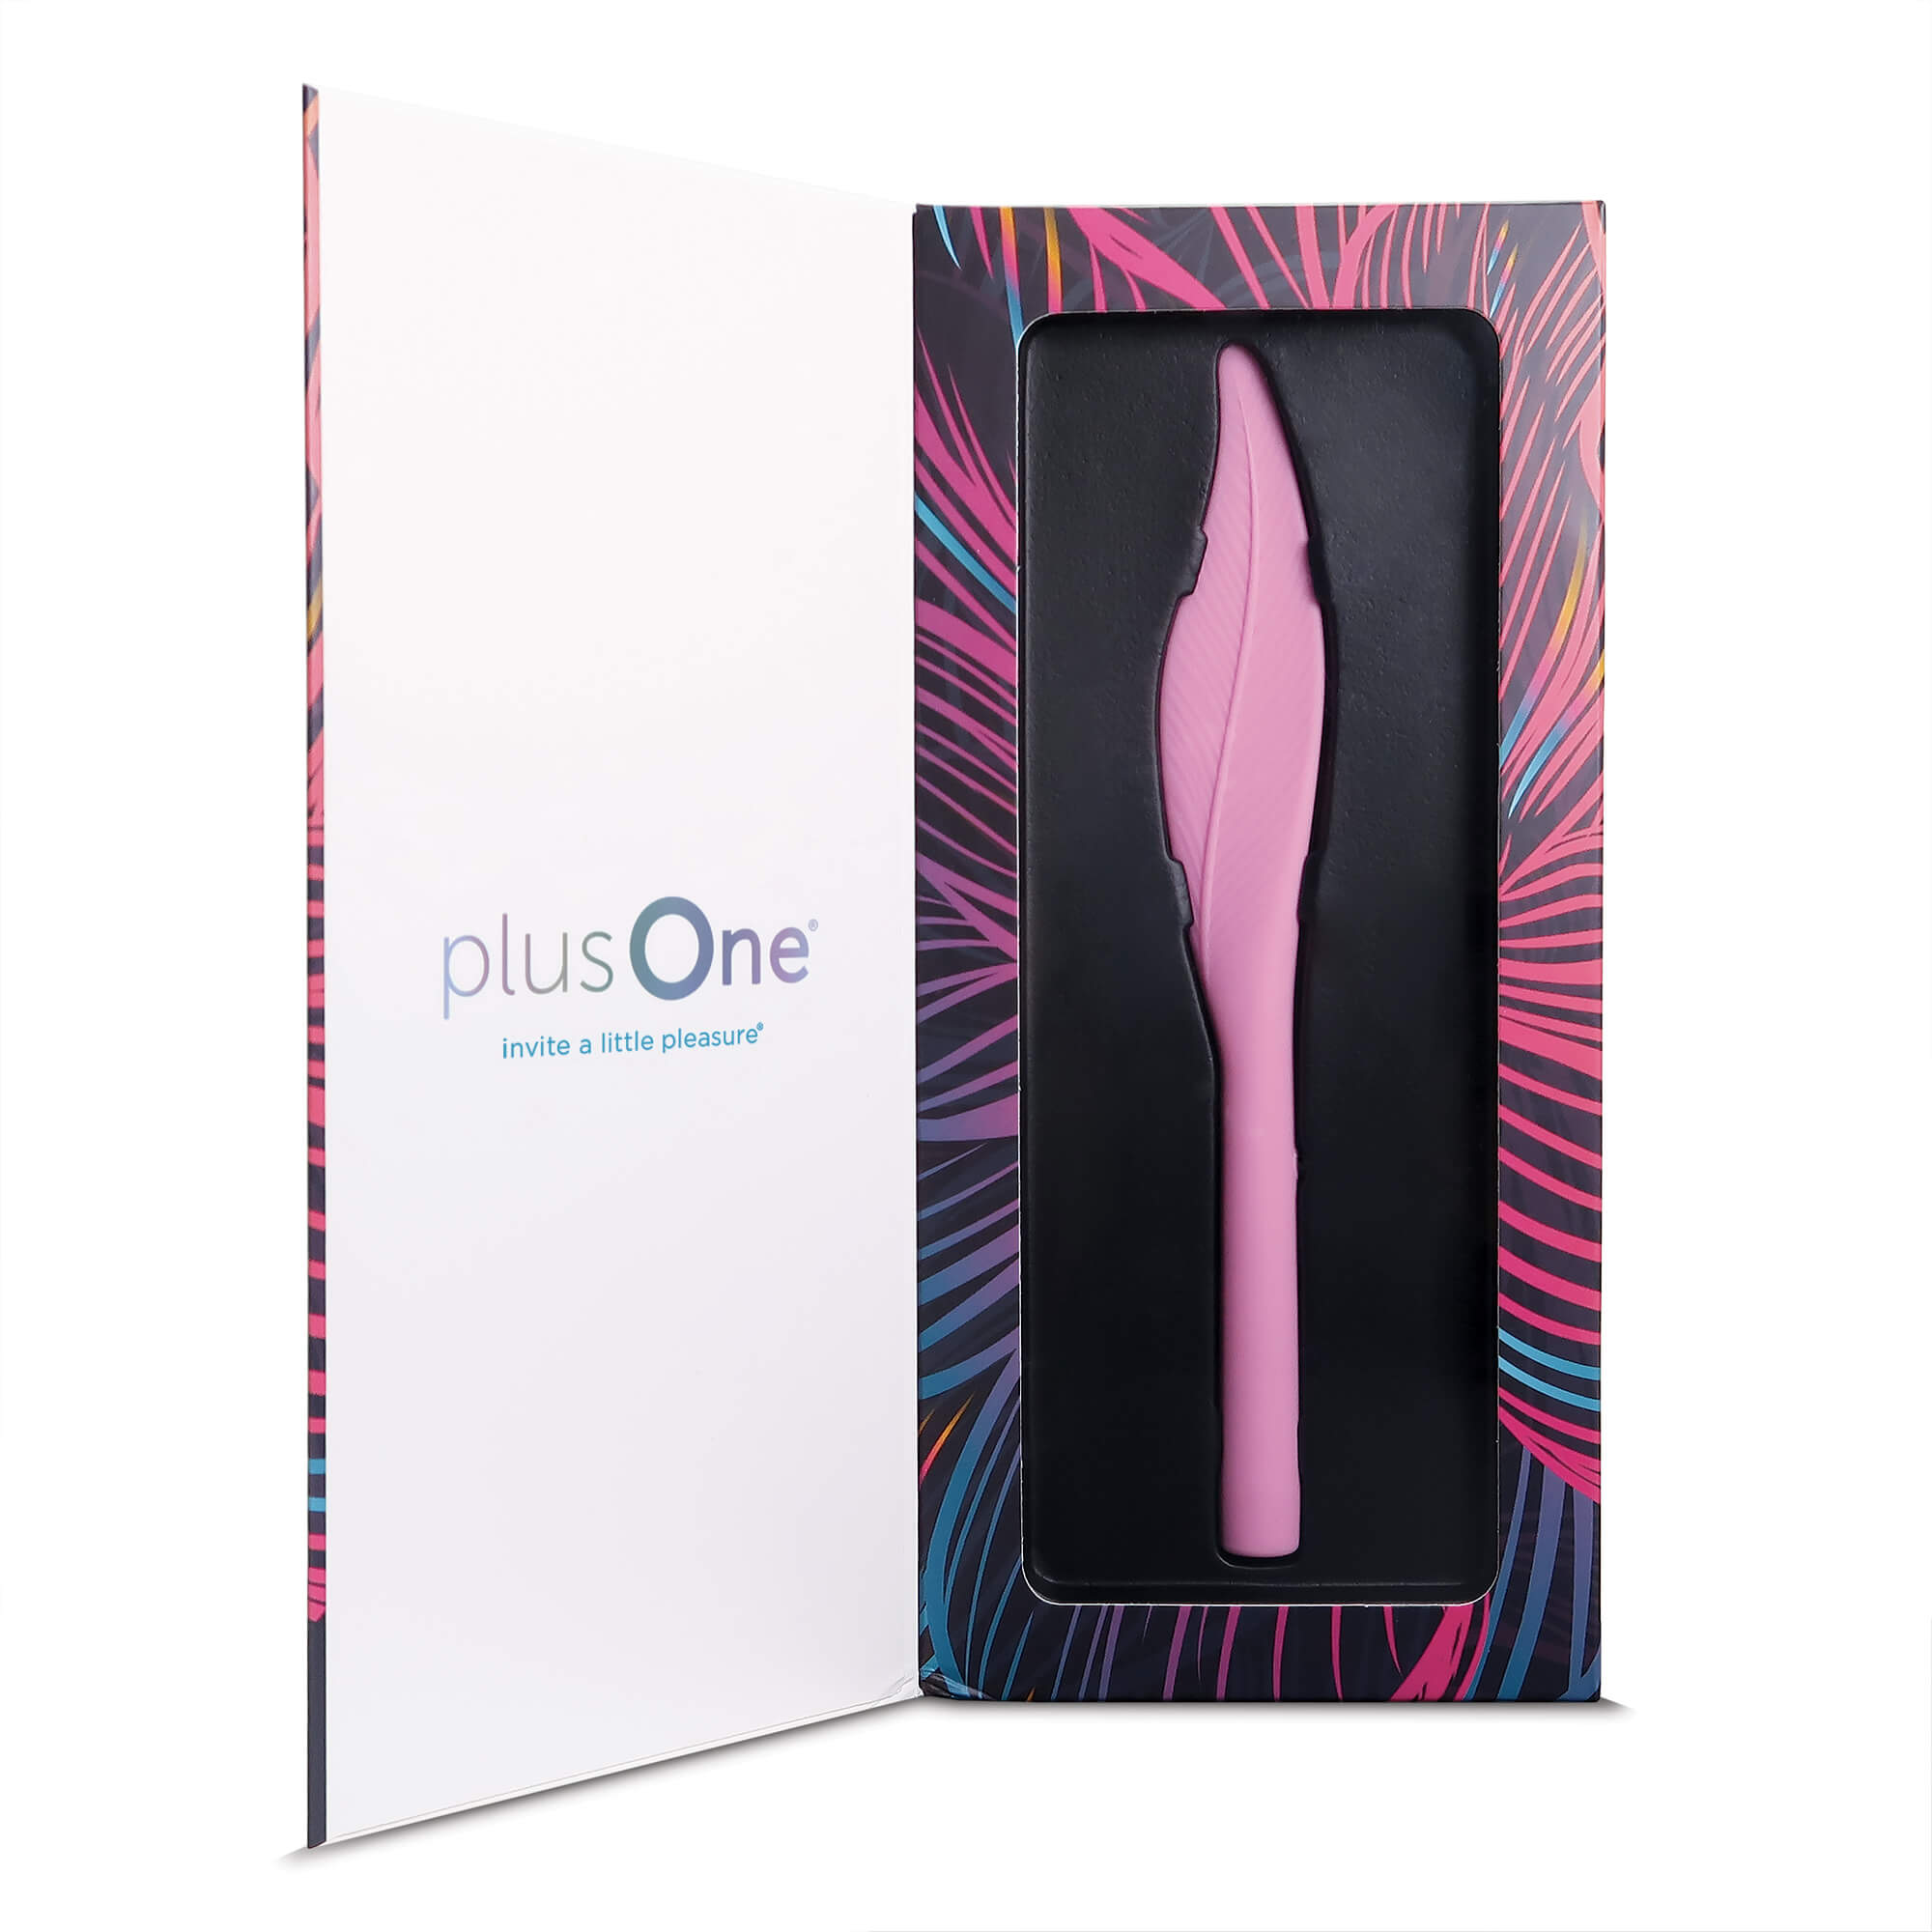 plusOne vibrating feather tickler in packaging